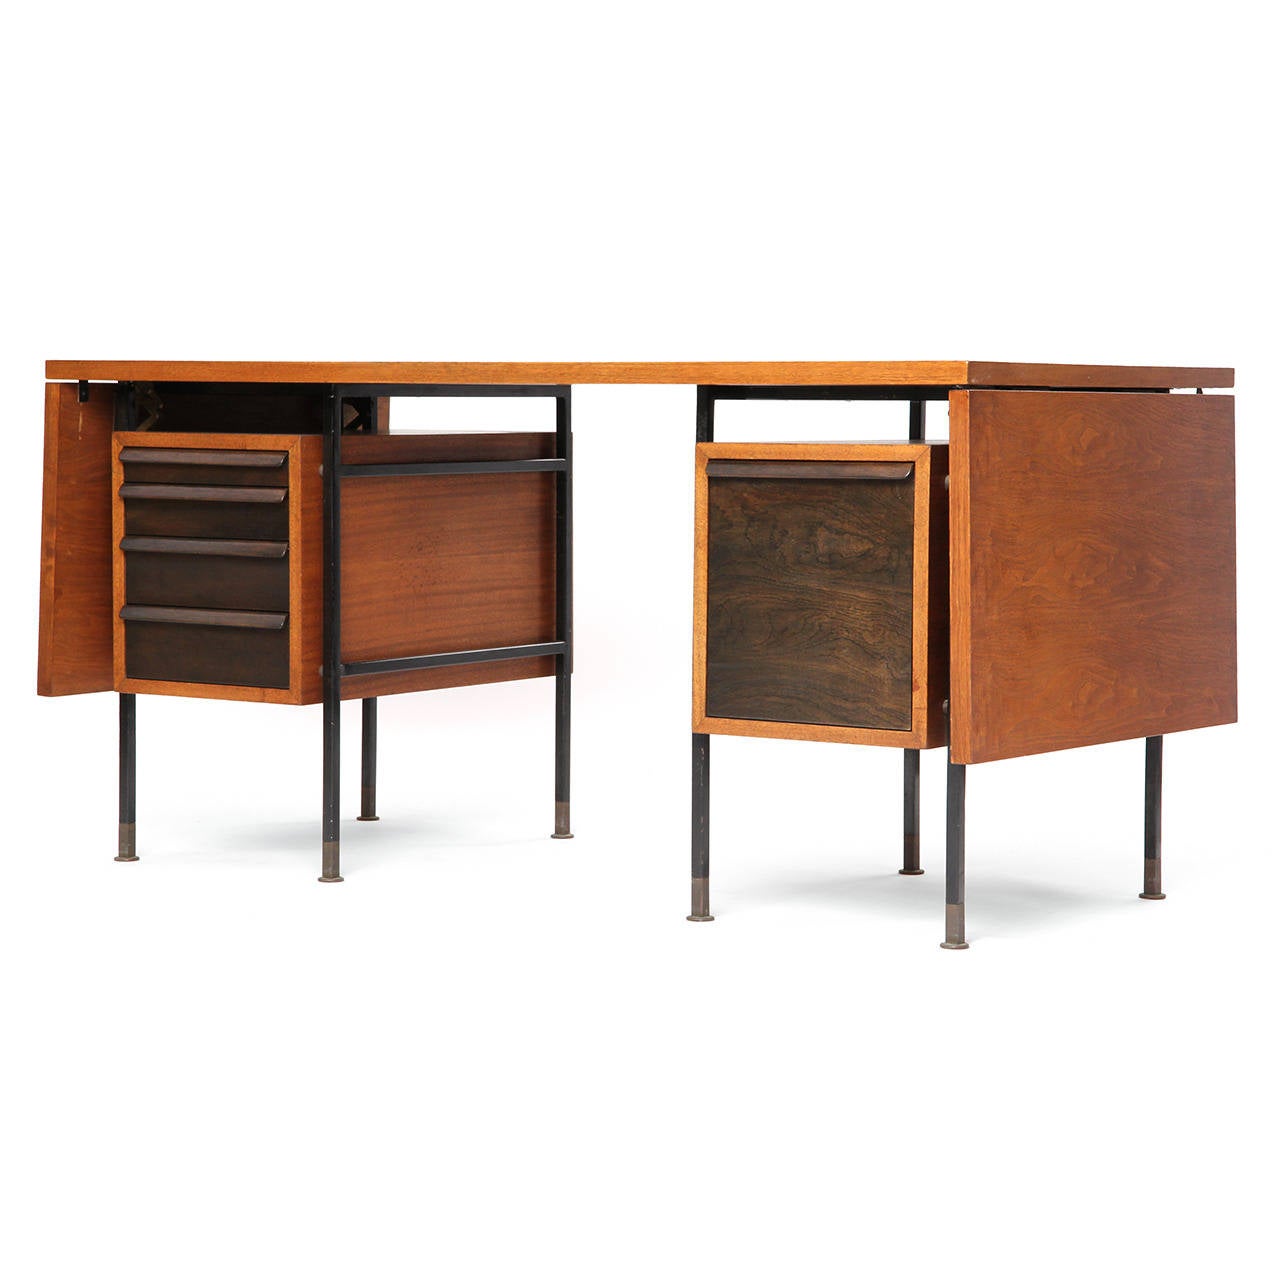 A fine, architectural and uncommon double drop-leaf desk, the figured walnut top hovering above two floating contrasting compartments (with open shelving on the back) suspended within a lacquered metal frame with expressive brass feet.